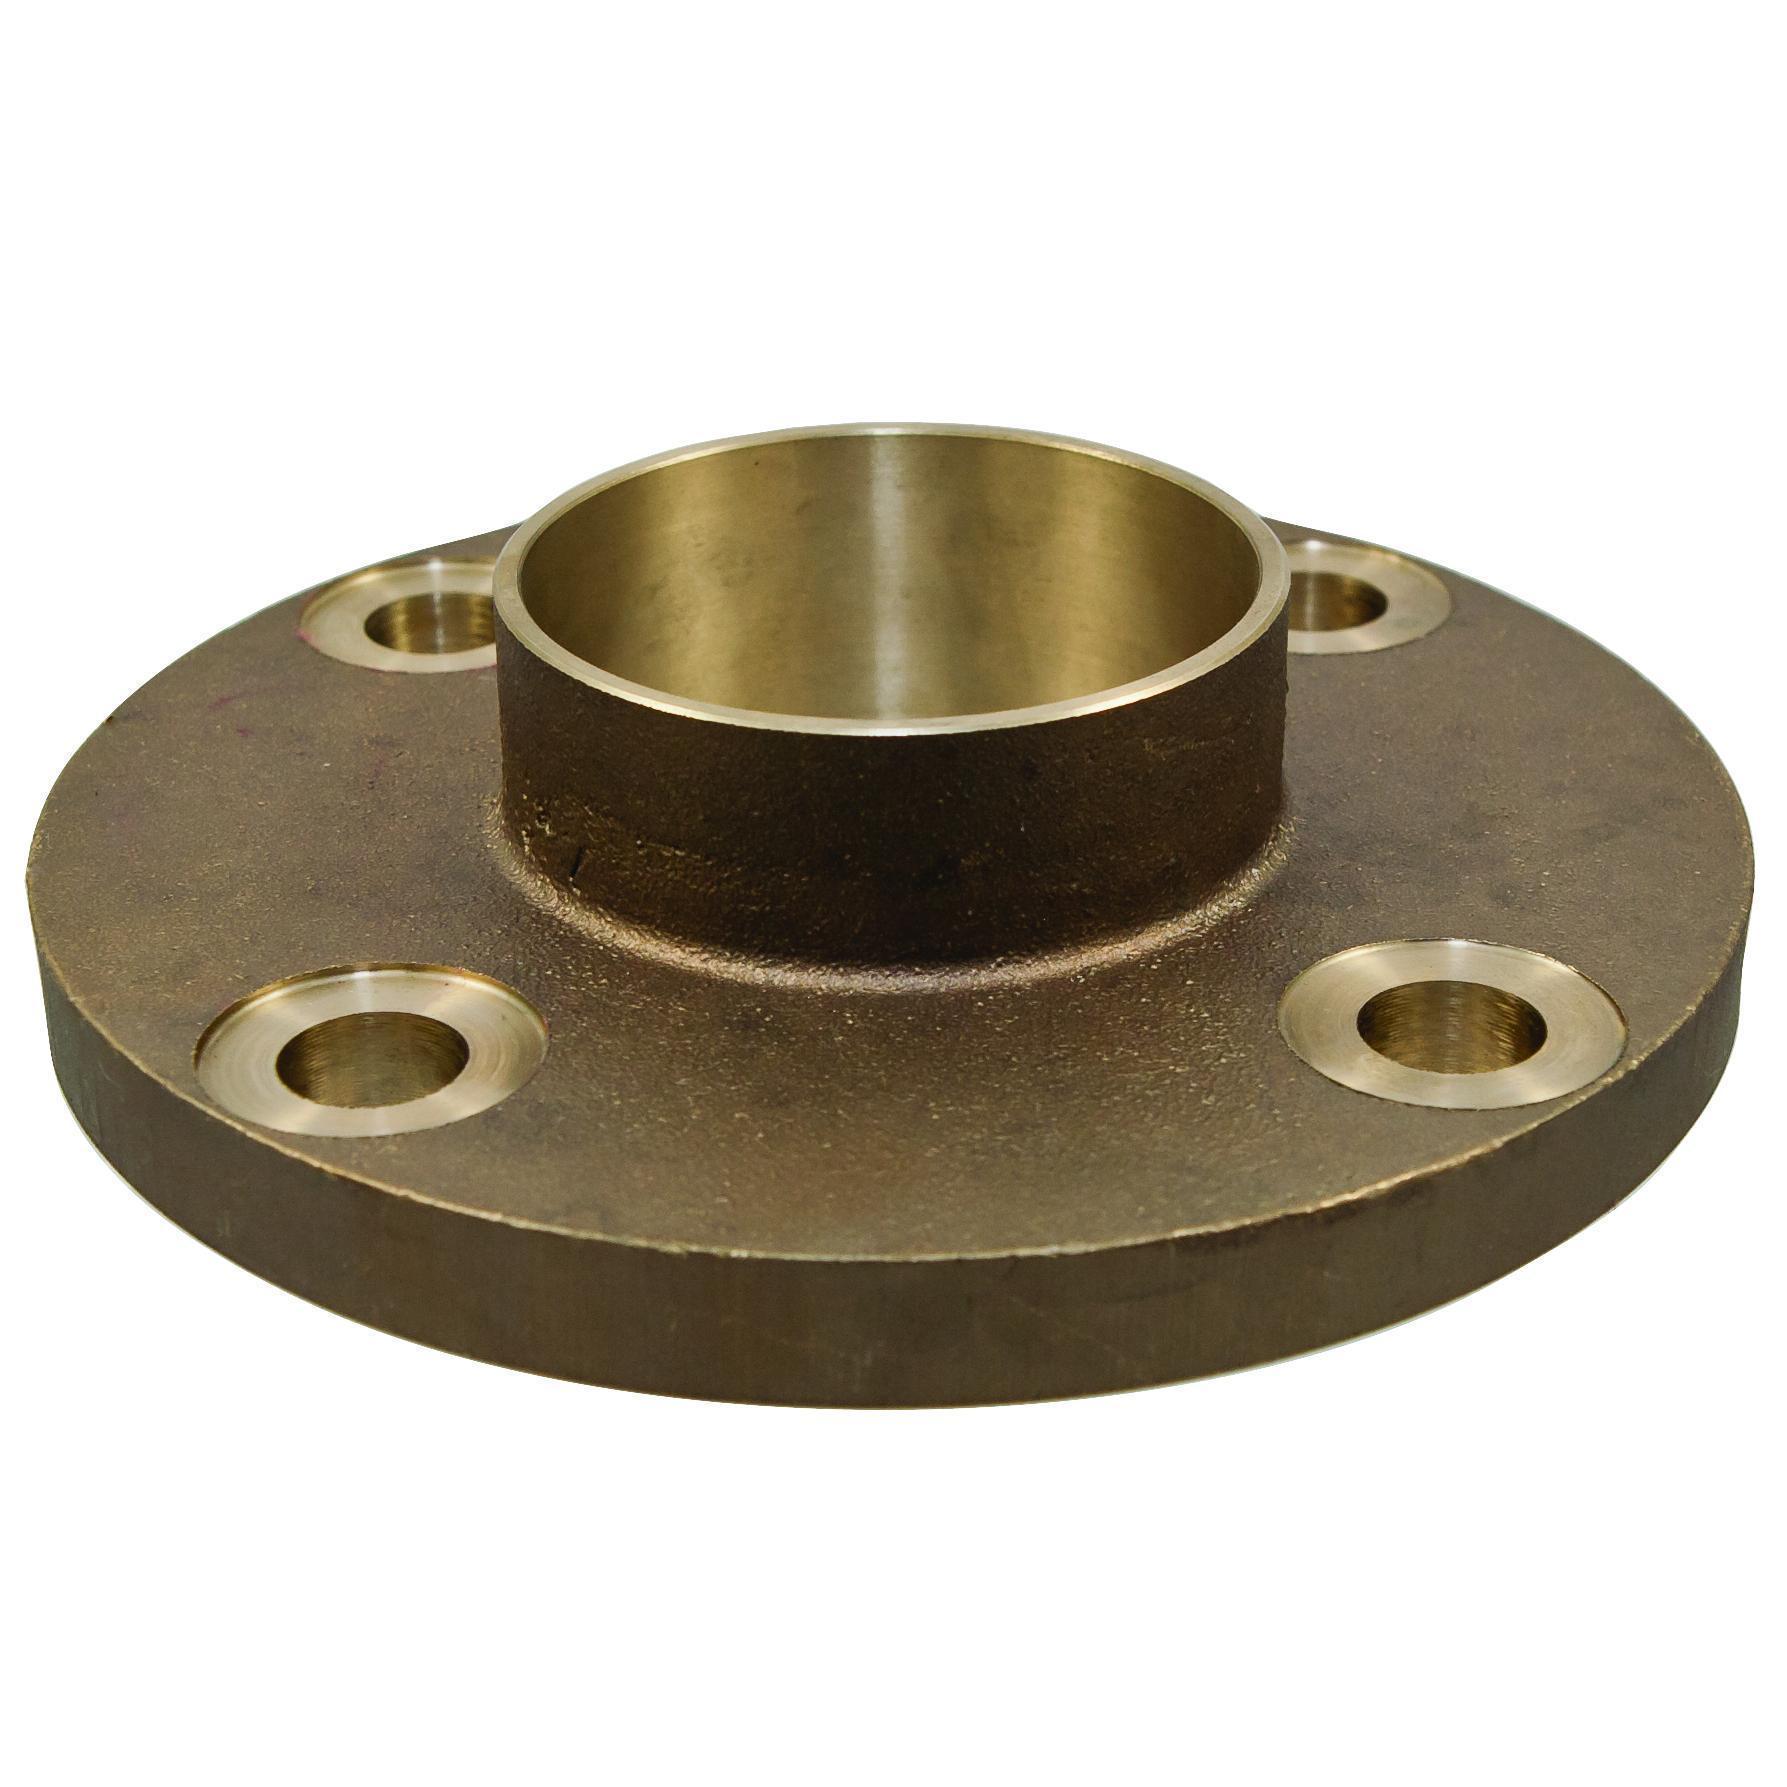 NIBCO® B49560L 771-LF Companion Flange, 3 in Nominal, Cast Bronze, Flanged Connection, 150 lb, Import